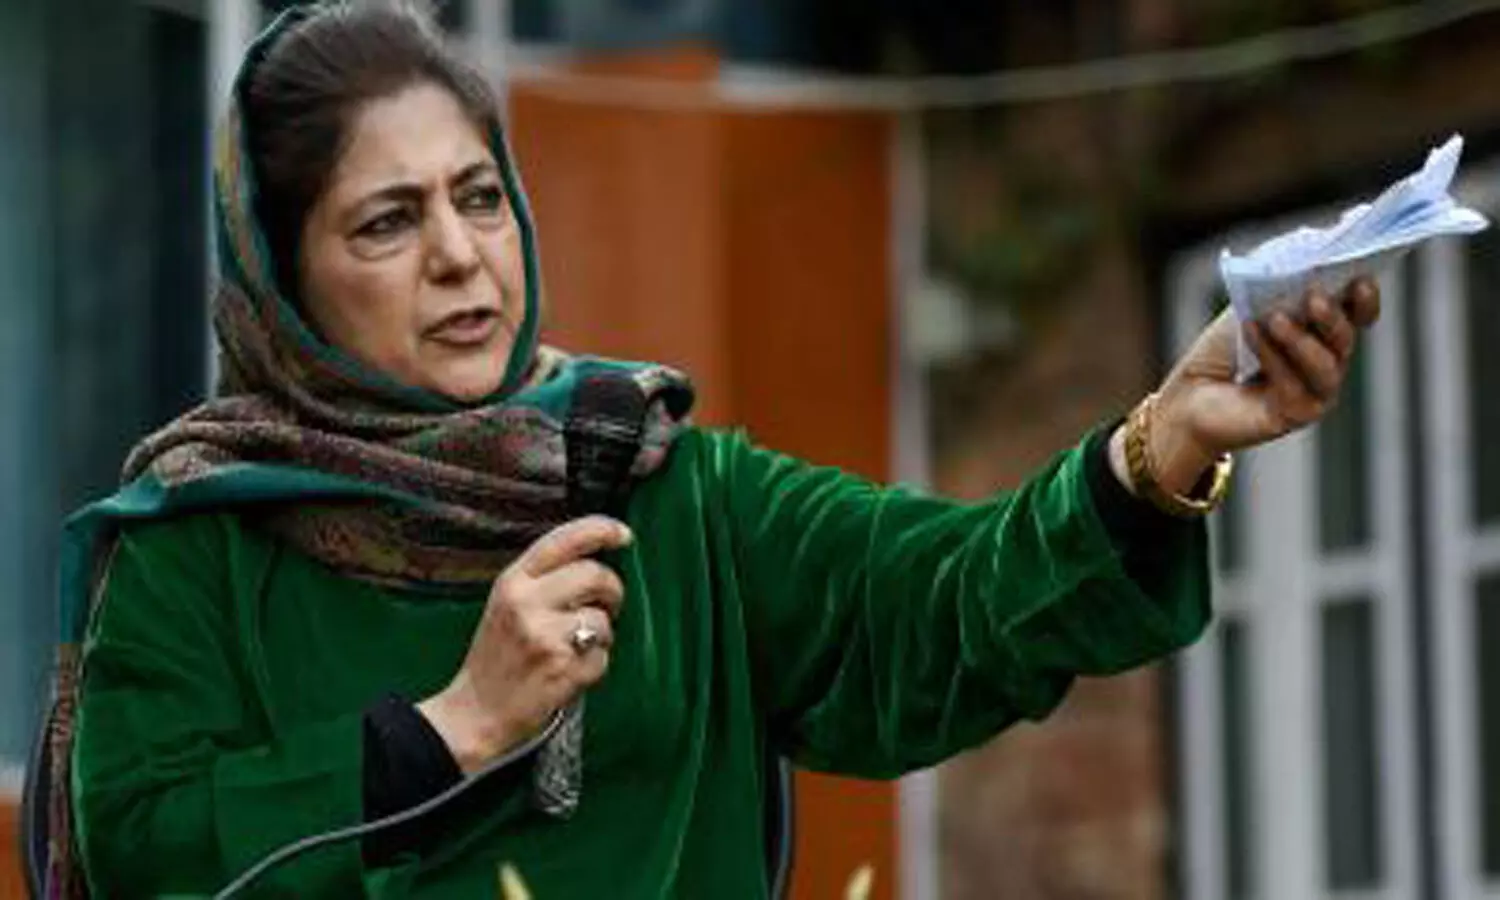 Bulldozer has become symbol of state terror against Muslims, says PDP chief Mehbooba Mufti